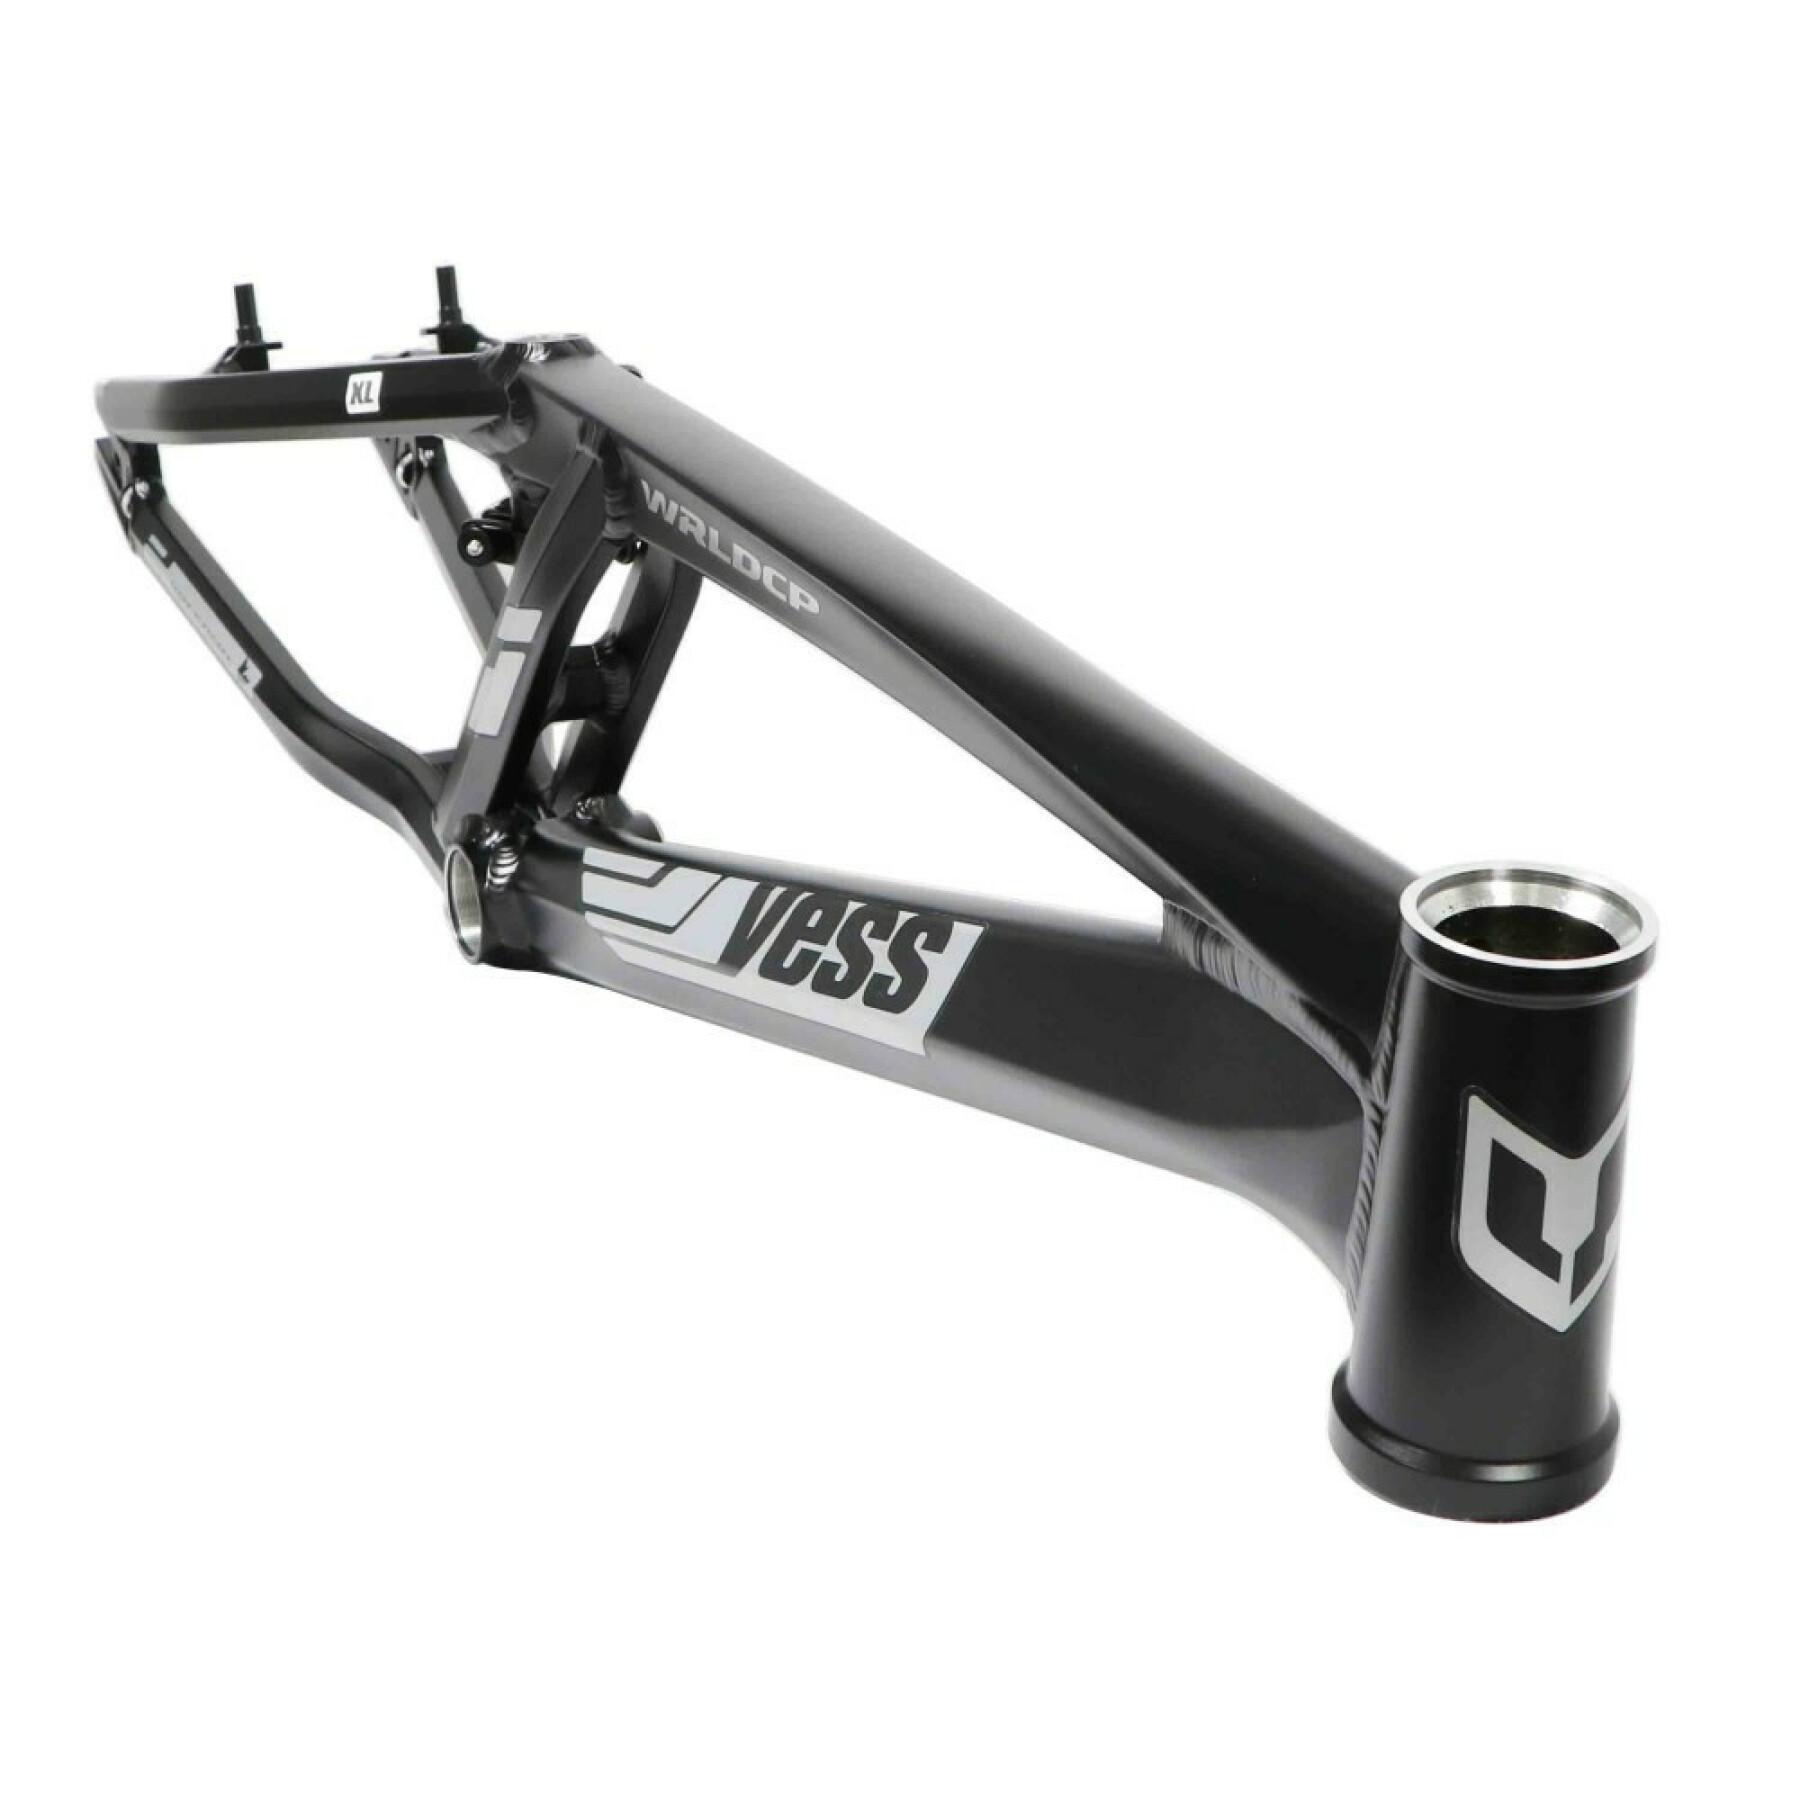 Ram YessBMX elite world cup tapered Pro